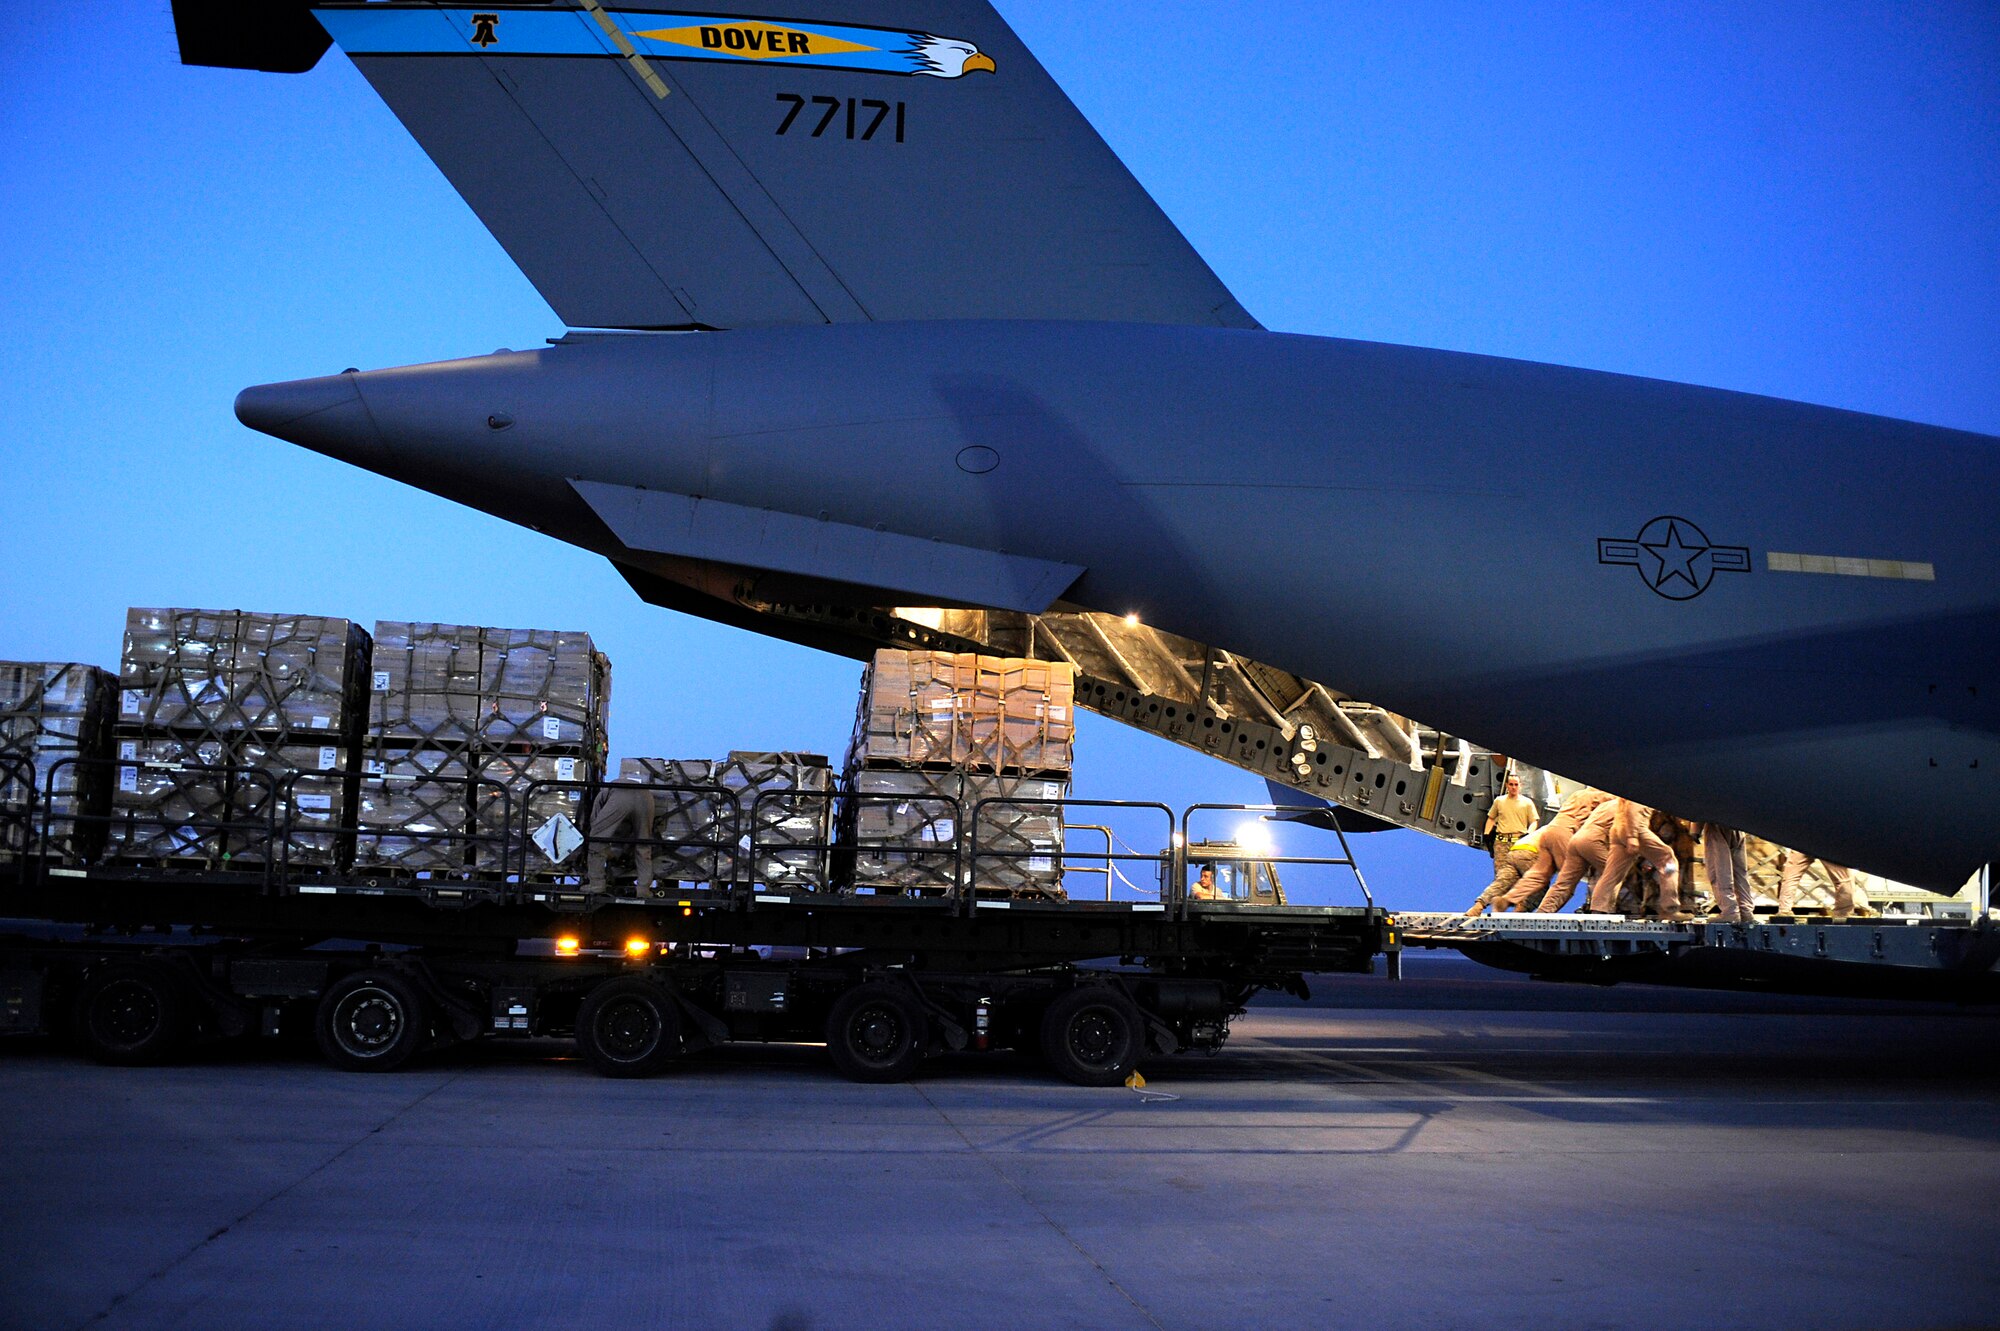 Airmen load a pallet containing humanitarian relief supplies destined for Pakistan into the cargo bay of a C-17 Globemaster III May 20 at an undisclosed location in Southwest Asia. (U.S. Air Force photo/Staff Sgt. Shawn Weismiller)